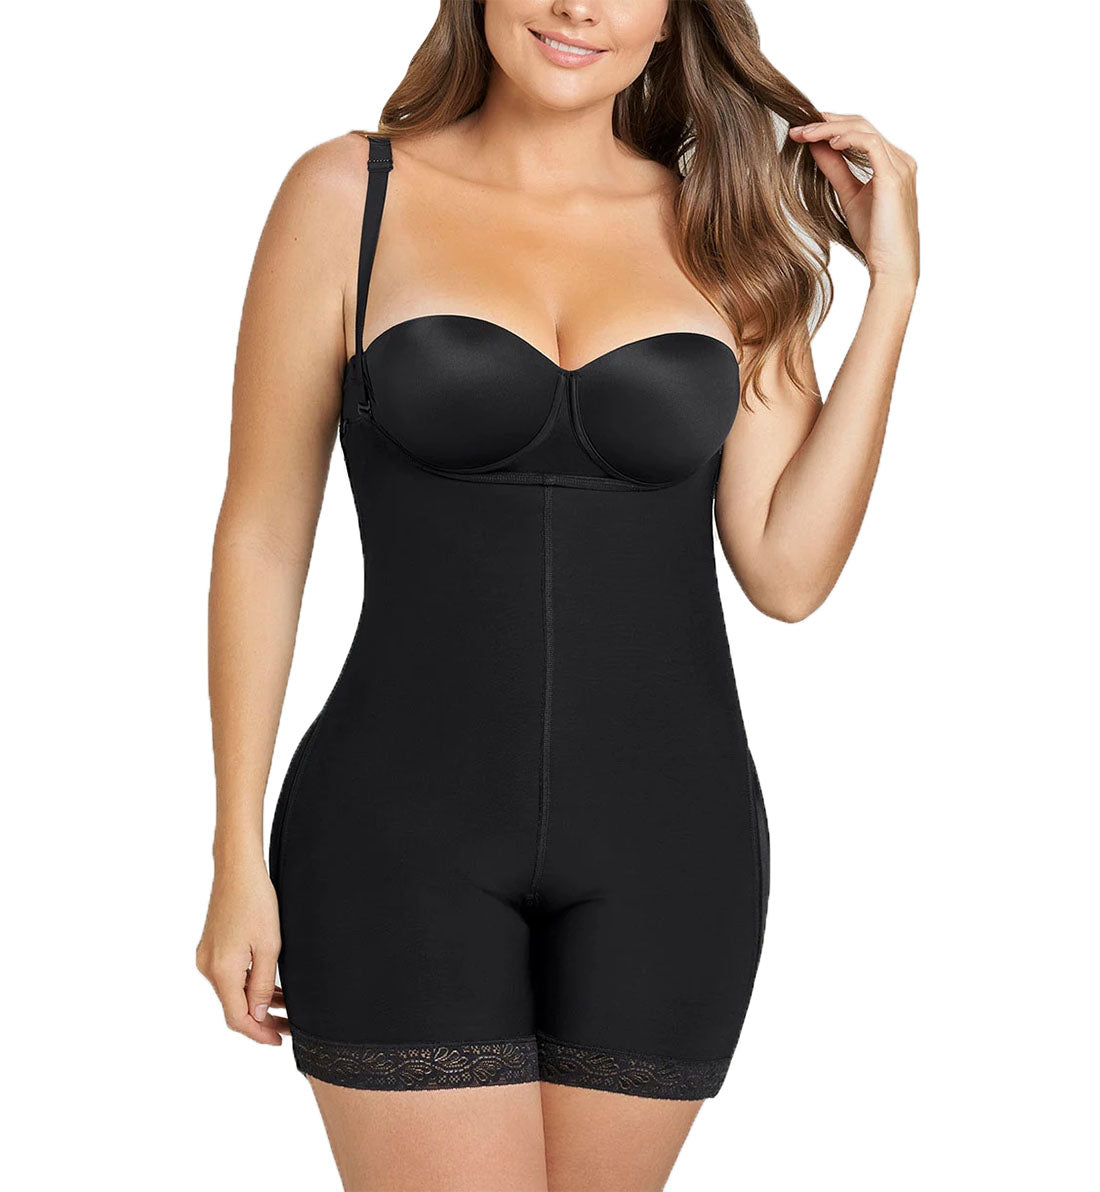 Leonisa Double Take Firm Compression Post-Surgical Body Shaper (018499),Small,Black - Black,Small